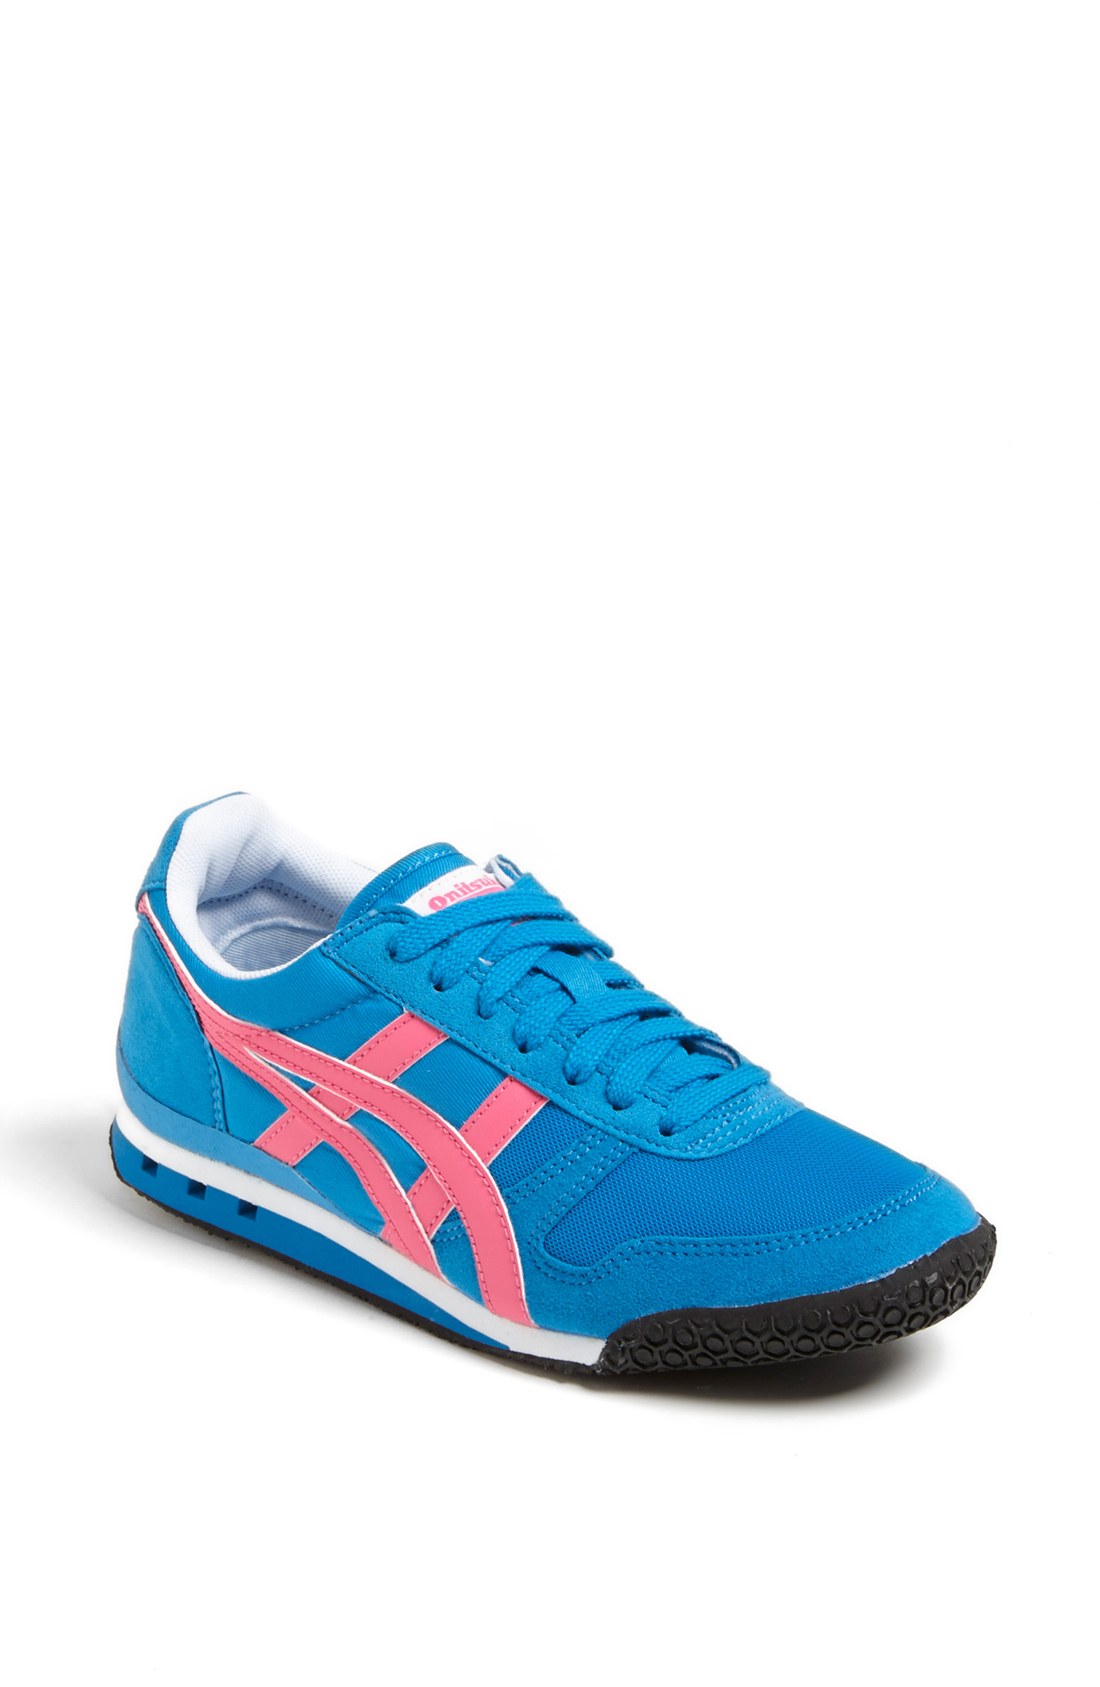 Onitsuka Tiger Ultimate 81 Sneaker in Blue (Electric Blue/ Neon Pink ...